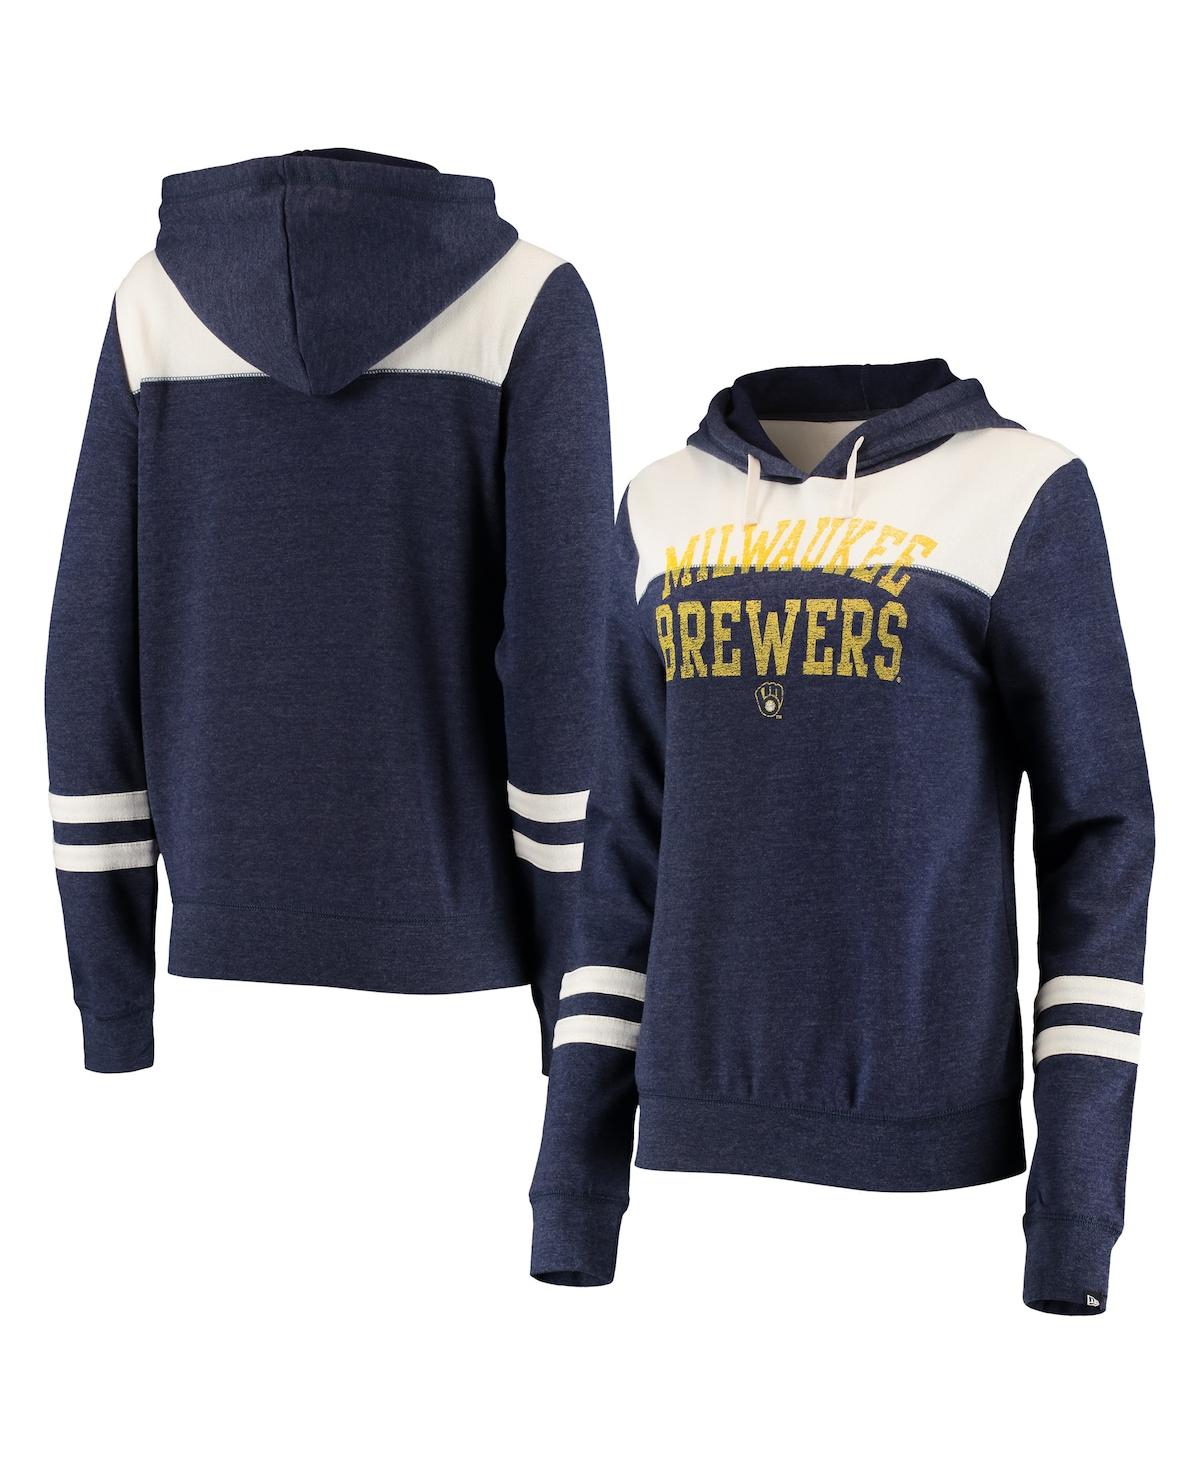 Women's New Era Heathered Navy and White Milwaukee Brewers Colorblock Tri-Blend Pullover Hoodie - Heathered Navy, White